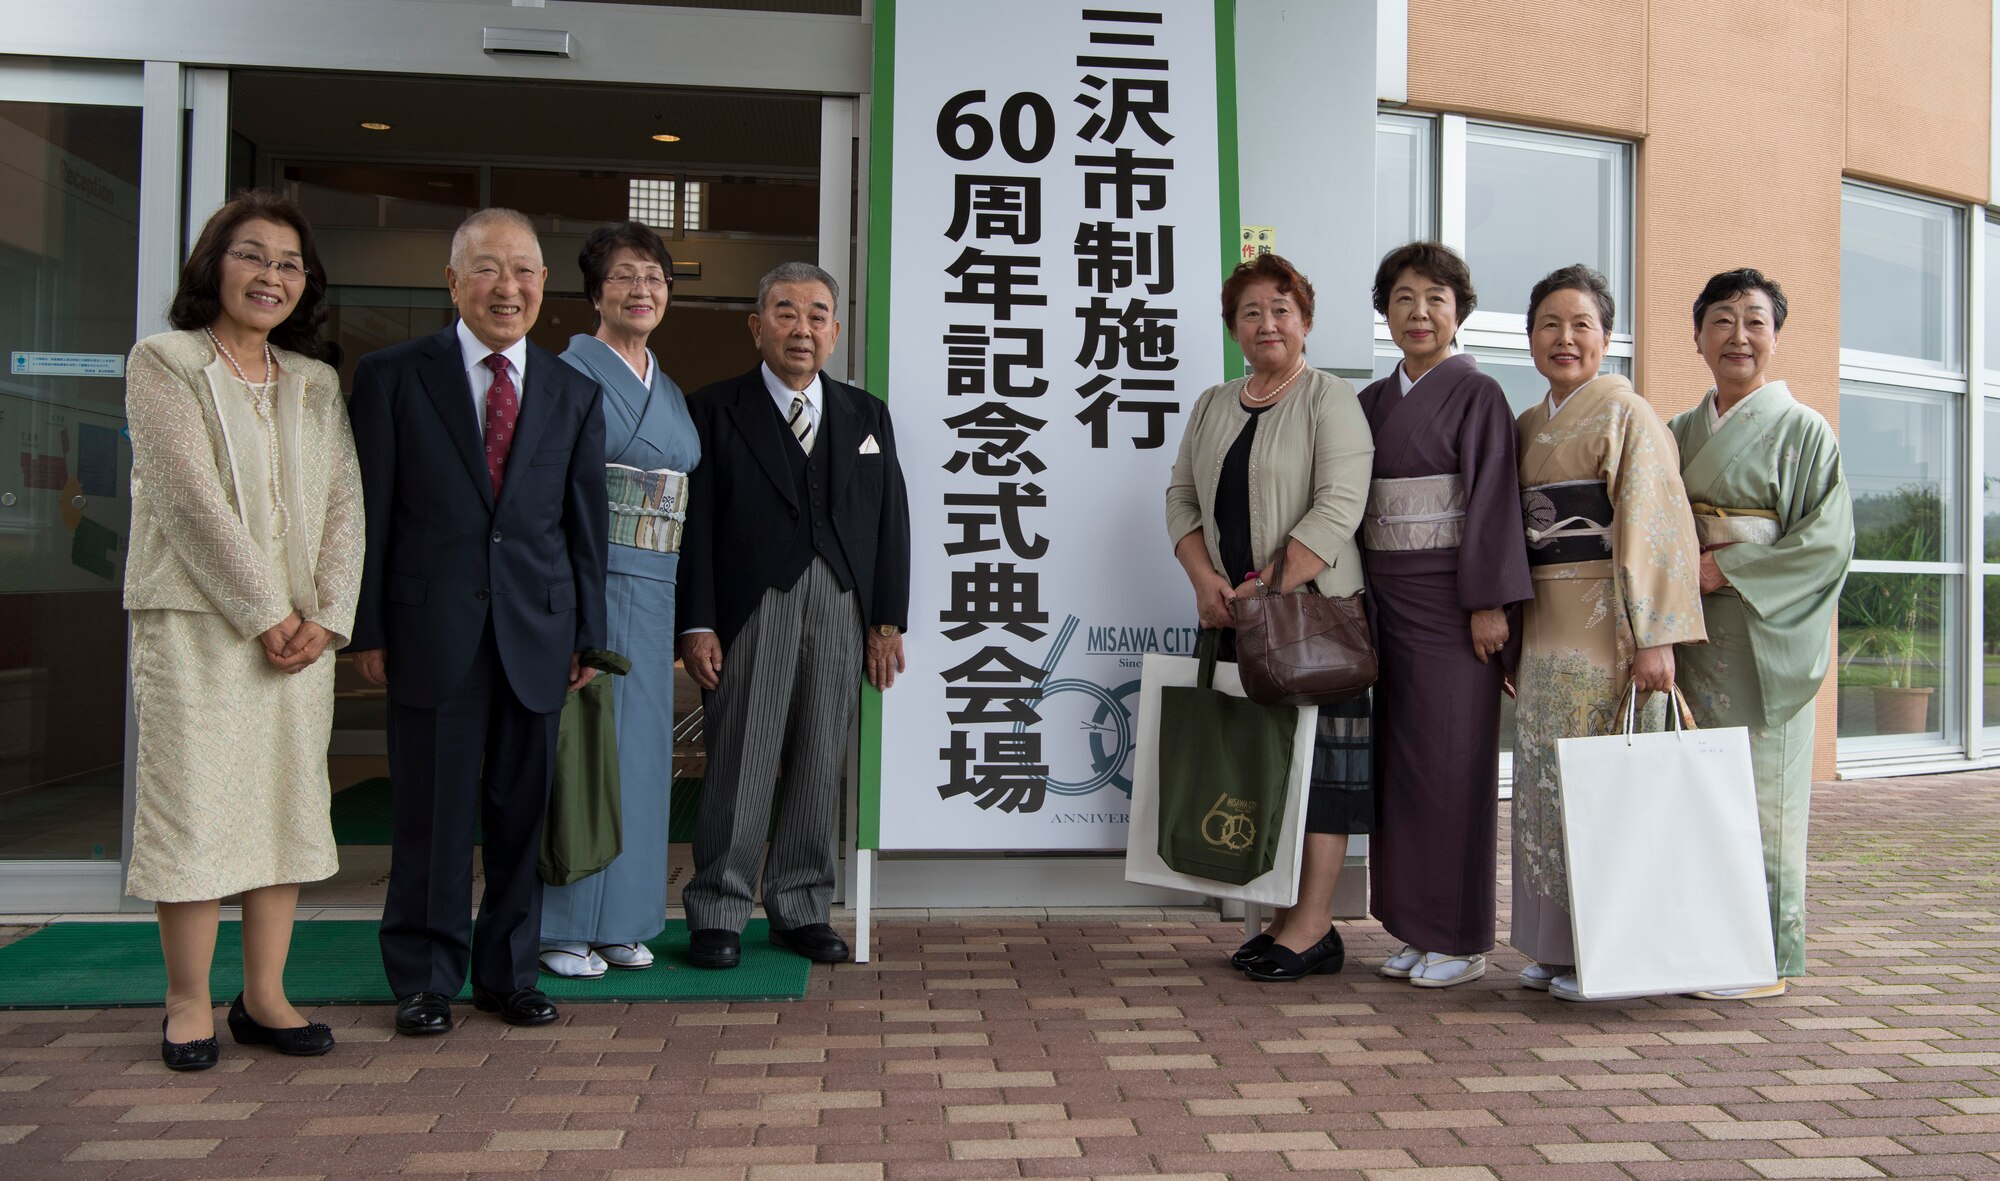 A group of Misawa city residents pose for a photo at the Misawa City 60th anniversary celebration ceremony held at the Misawa International Center in Misawa City, Japan, Sept. 1, 2018. Kazumasa Taneichi, the Misawa City mayor, noted he is impressed with Misawa City residents’ resiliency when faced with challenges such as natural disasters. (U.S. Air Force photo by Airman 1st Class Collette Brooks)